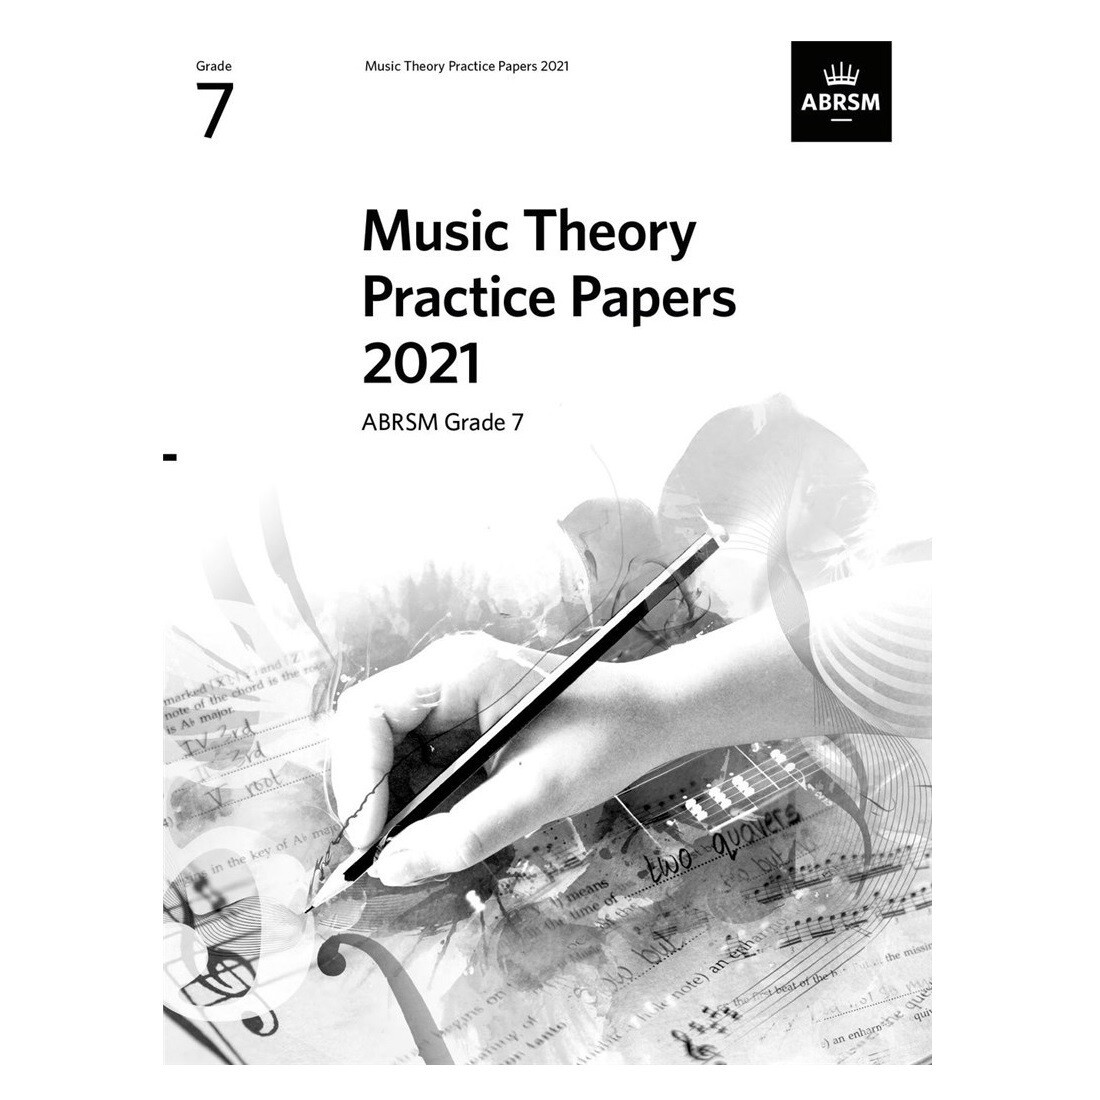 ABRSM Music Theory Practice Papers 2021: Grade 7